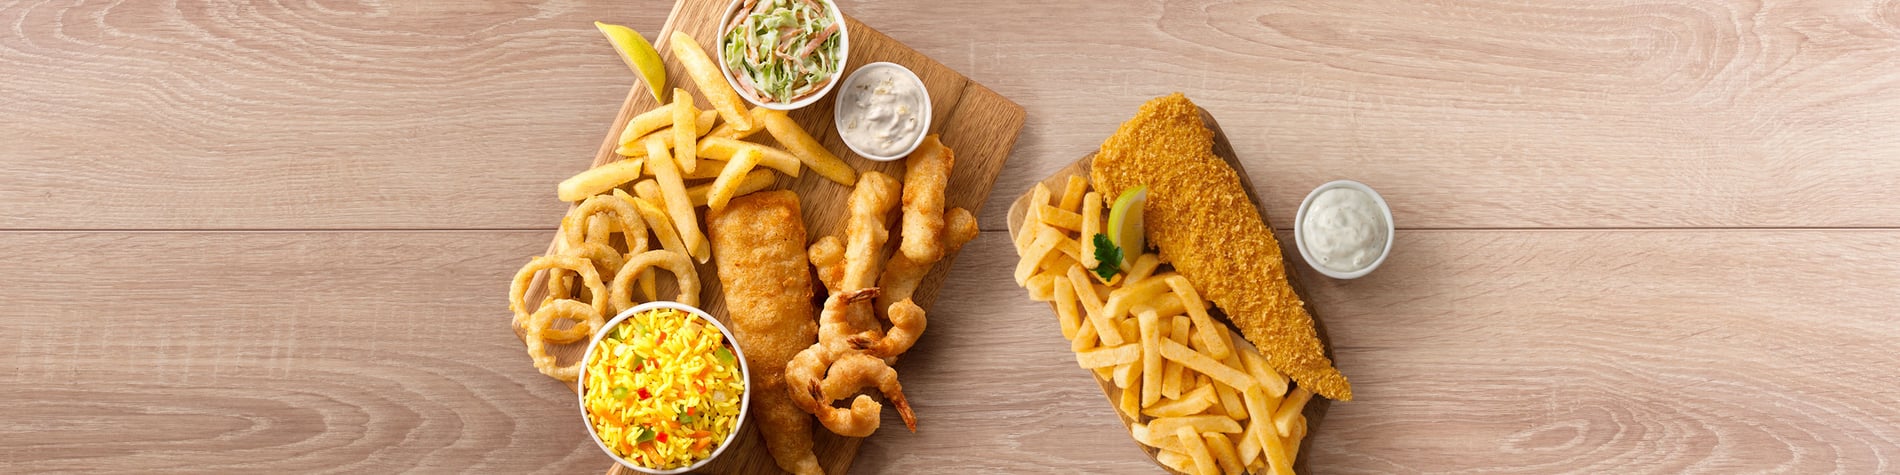 Seafood meals from Fishaways Zevenwacht Mall including a Crunchy Fish and Chips meal and a seafood Platter for One with hake, calamari, prawns, chips, onion rings, and coleslaw.